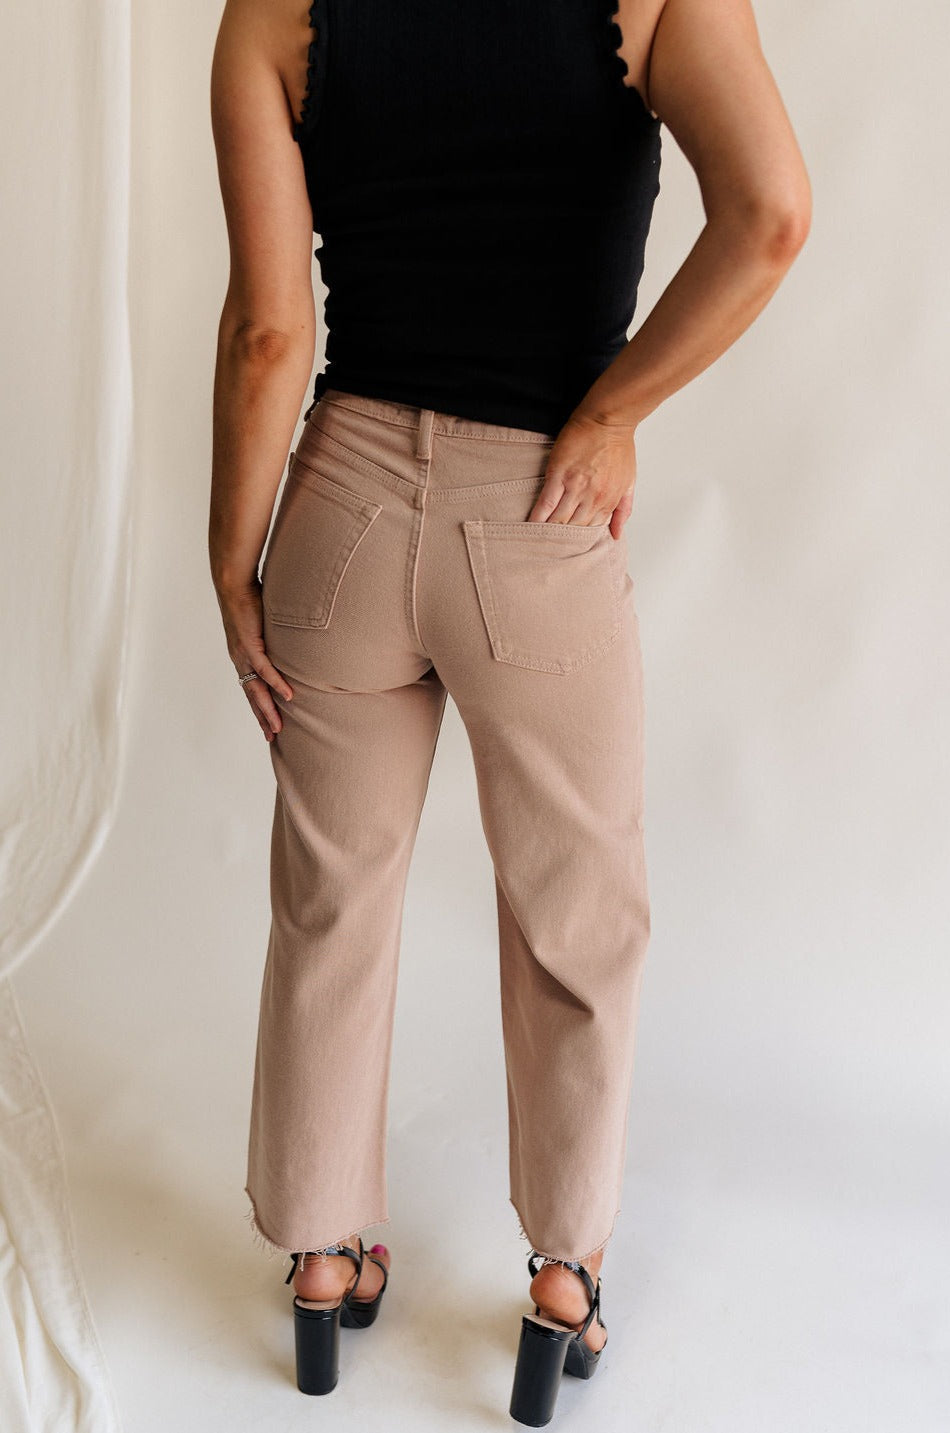 Back view of female model wearing the Lena Light Taupe Wide Cropped Leg Pants which features Light Taupe Denim Fabric, Wide Pant Leg, Raw Hem, Front Zipper with Button Closure, Two Front Pockets, Two Back Pockets and Belt Loops